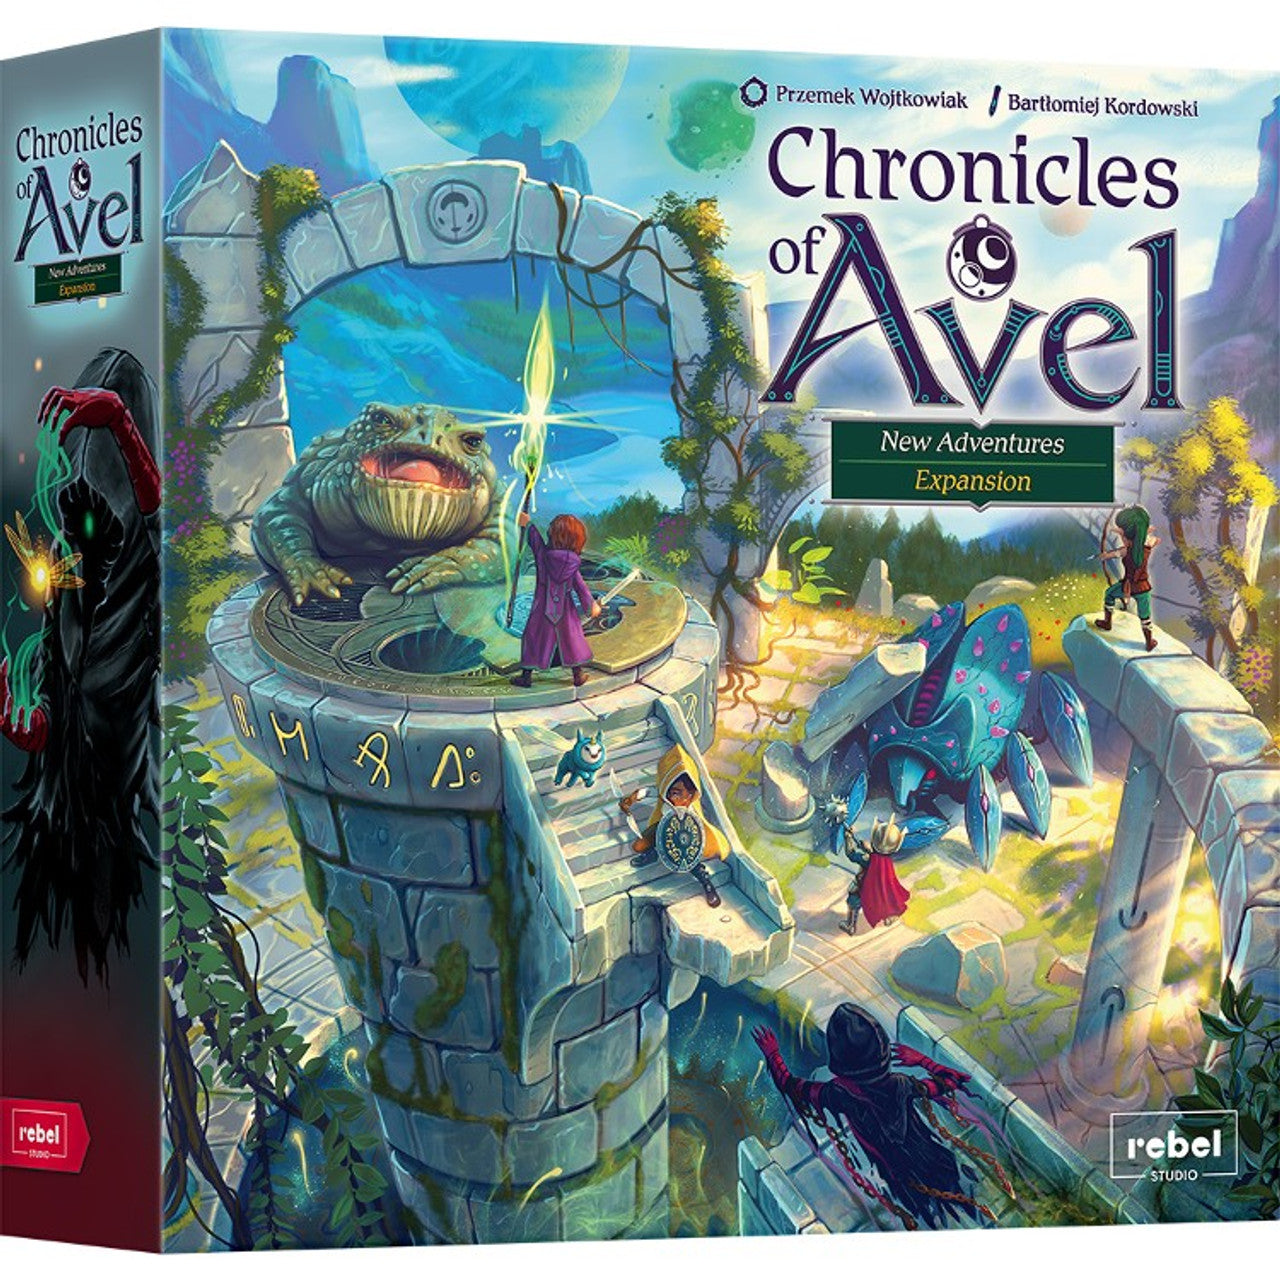 Chronicles of Avel: New Adventures Expansion